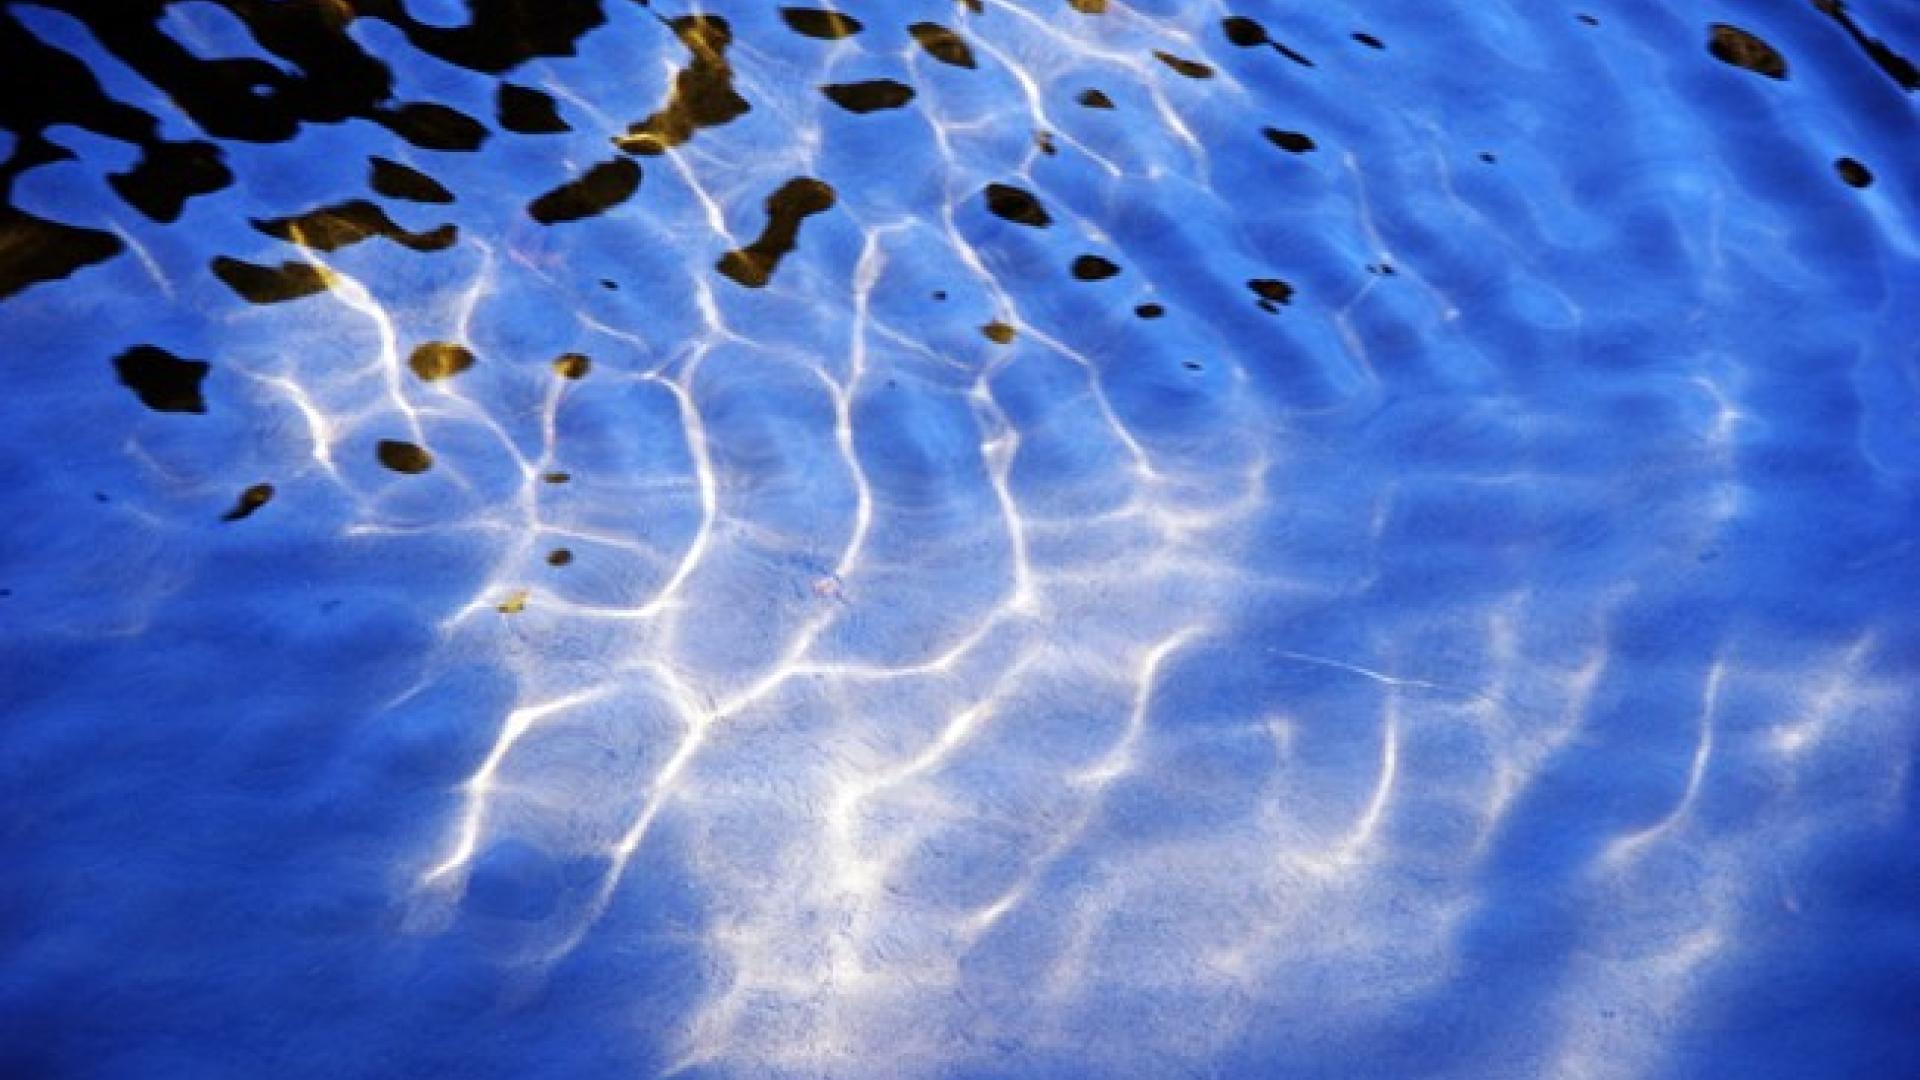 Blue water ripples